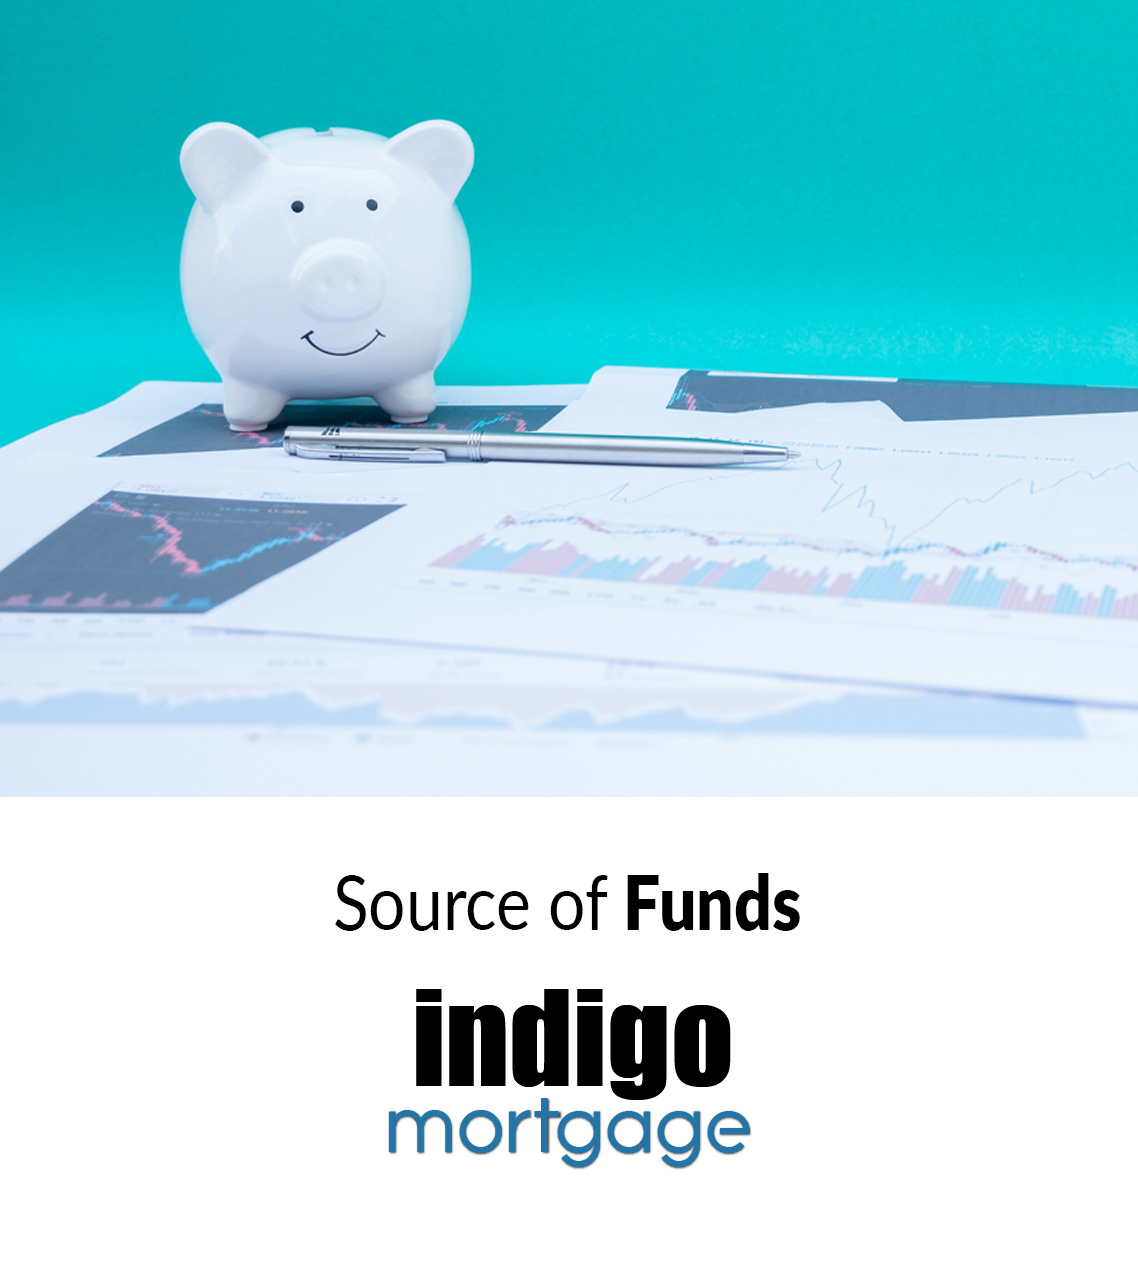 Source of funds for a mortgage